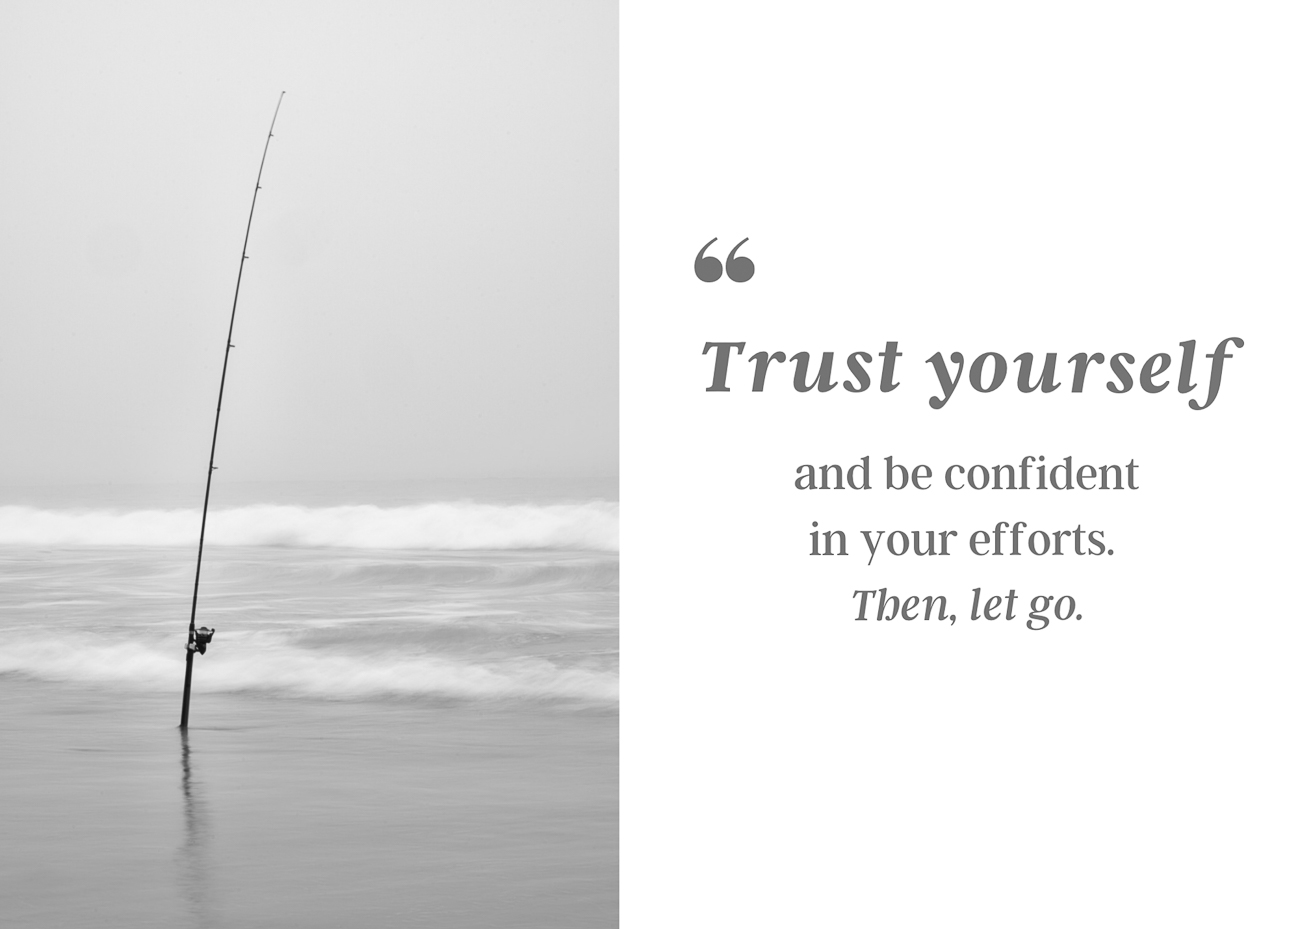 A photo of a fishing pole with a line cast into the surf and a quote to trust let go.